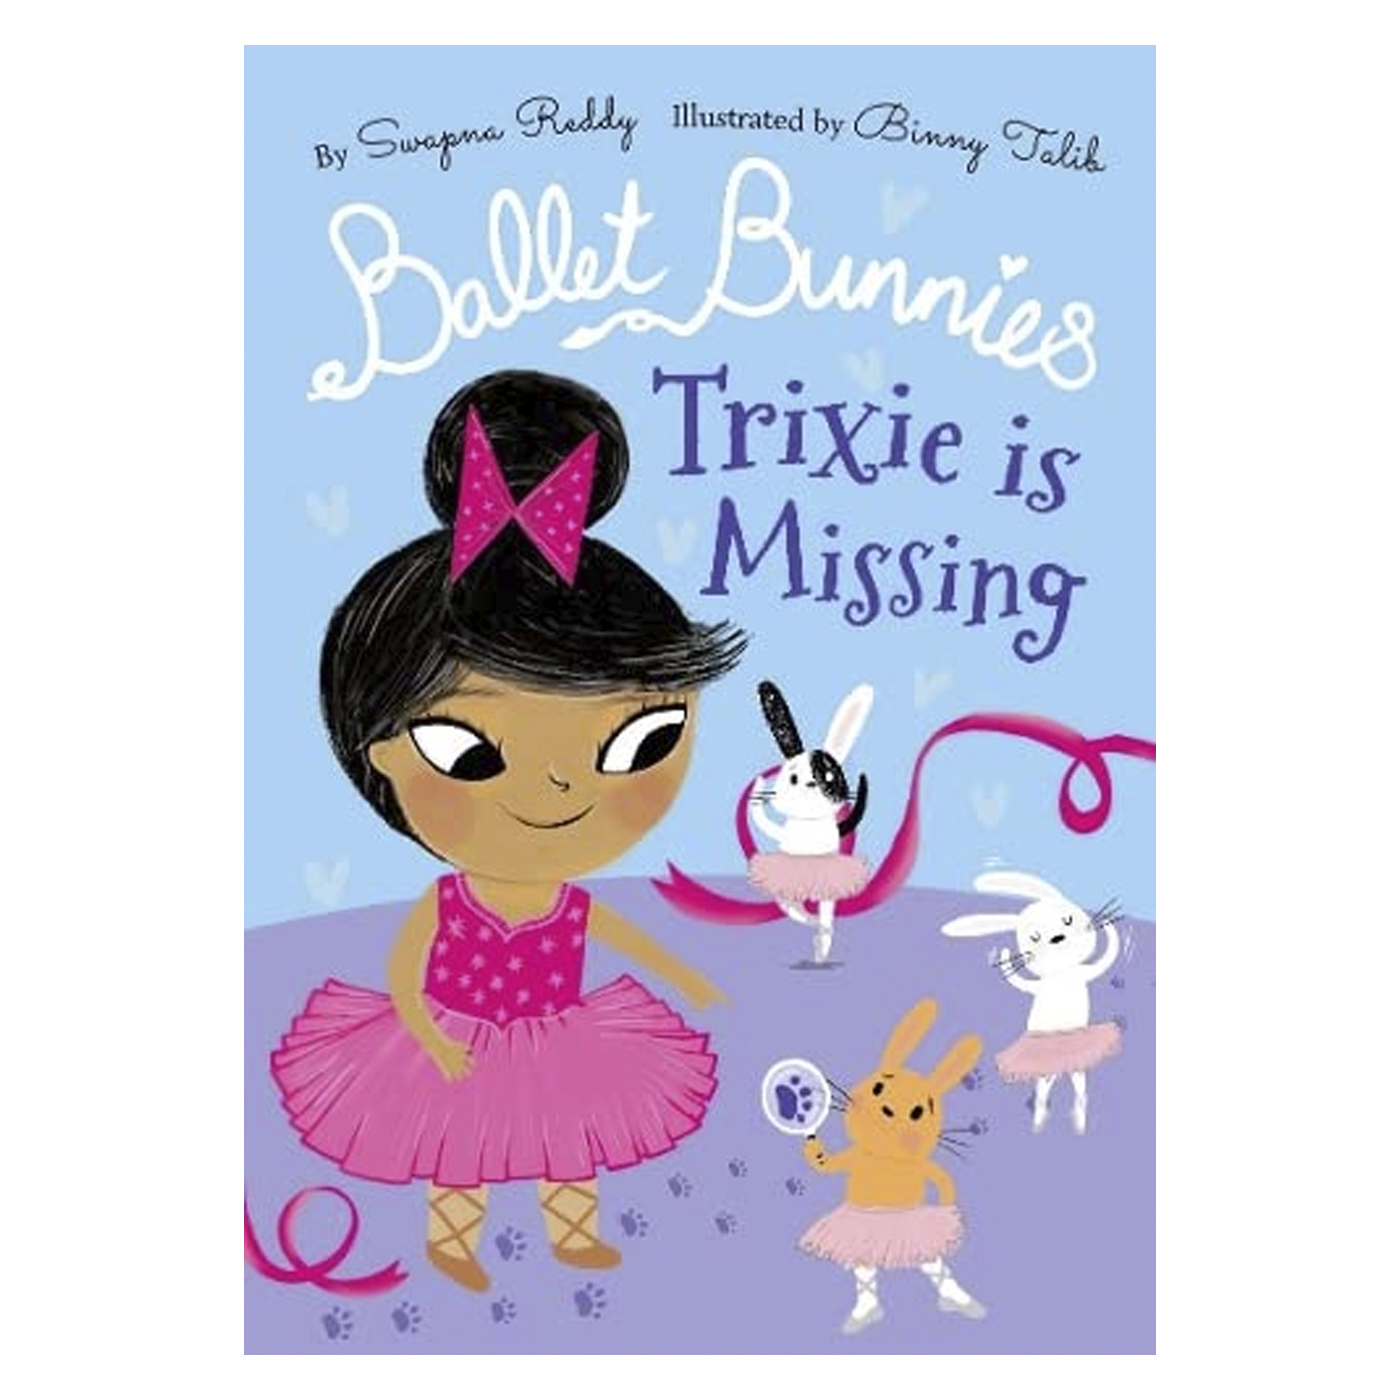 OXFORD CHILDRENS BOOK Ballet Bunnies: Trixie Is Missing